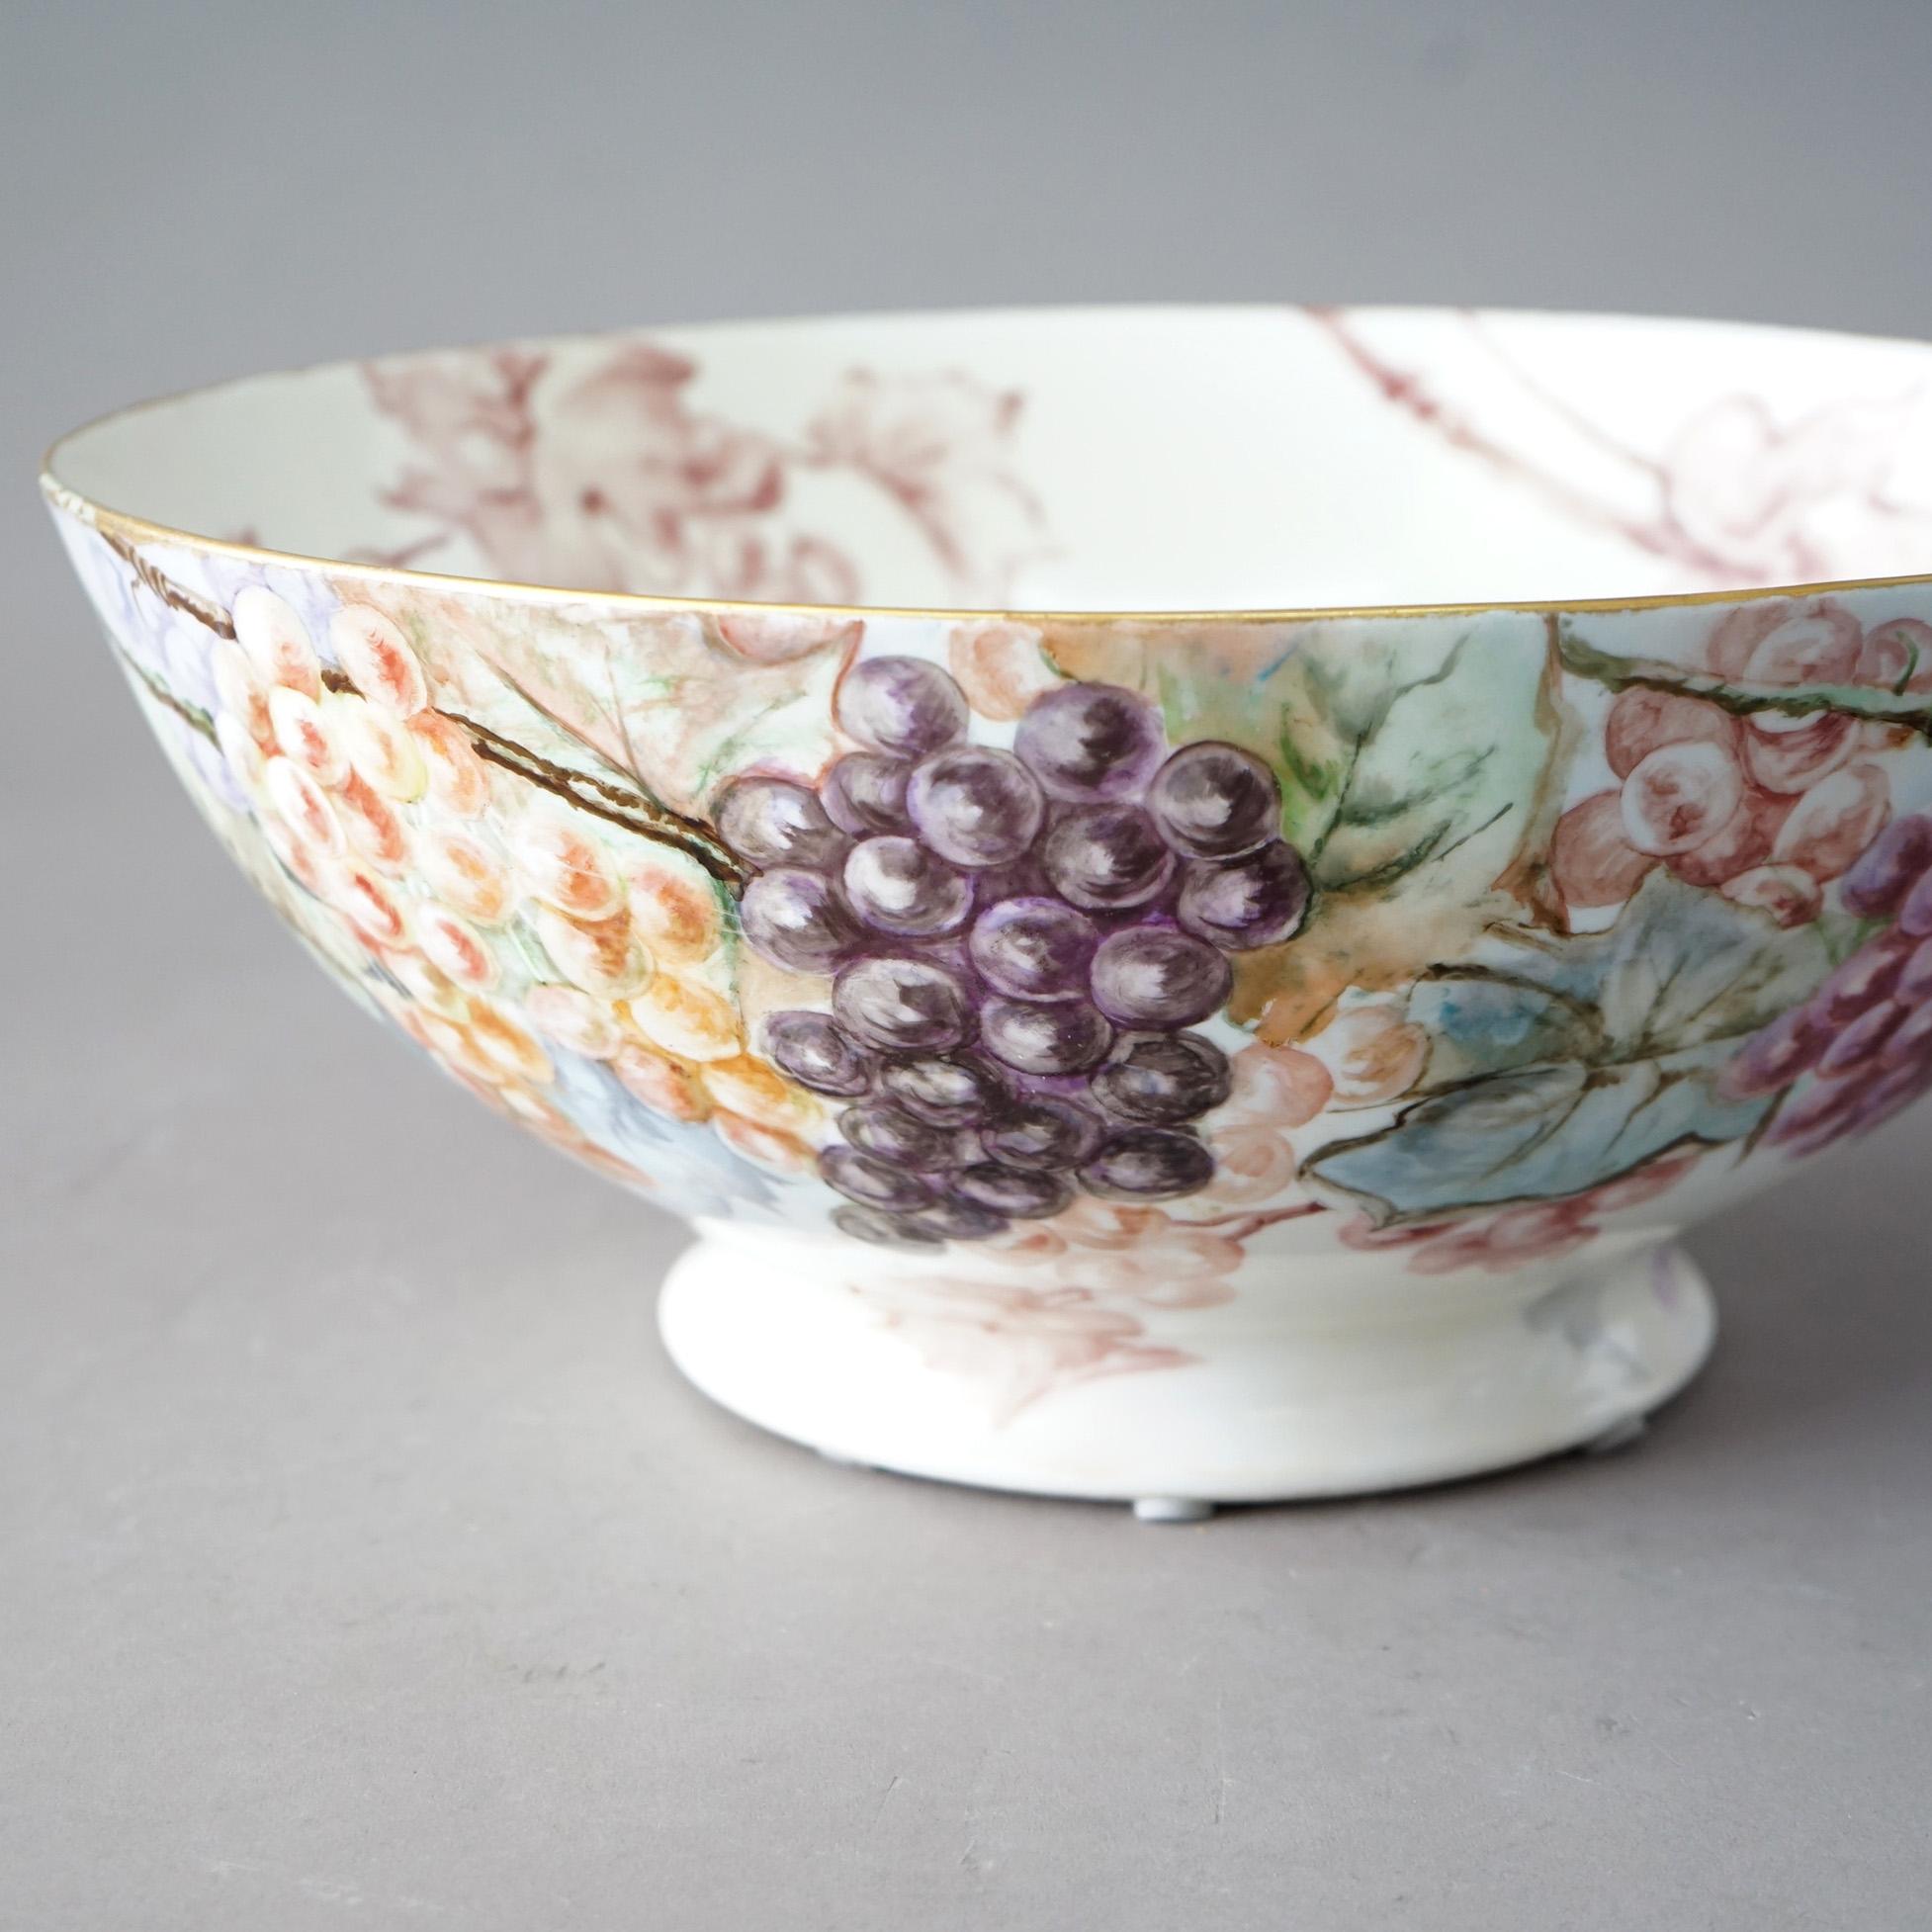 Antique Limoges Porcelain Hand Painted Floral, Grape & Spider Web Bowl C1900 In Good Condition For Sale In Big Flats, NY